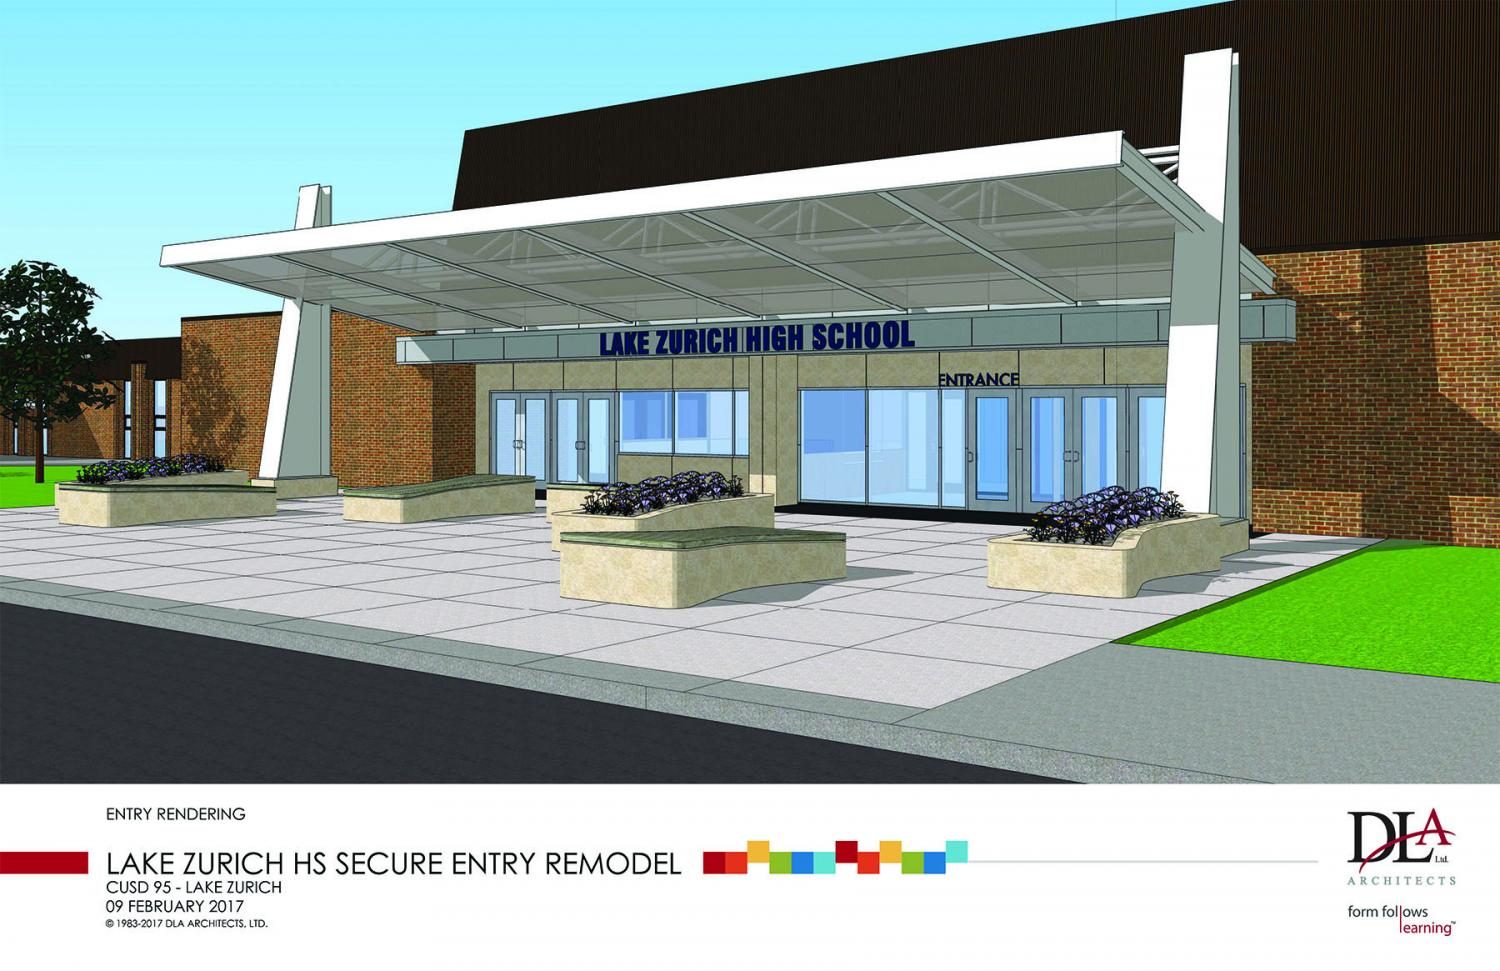 Starting this summer, the building will undergo renovations, including a new main entrance. The entrance will make the building more secure, according to Ryan Rubenstein, assistant principal for activities and facilities.